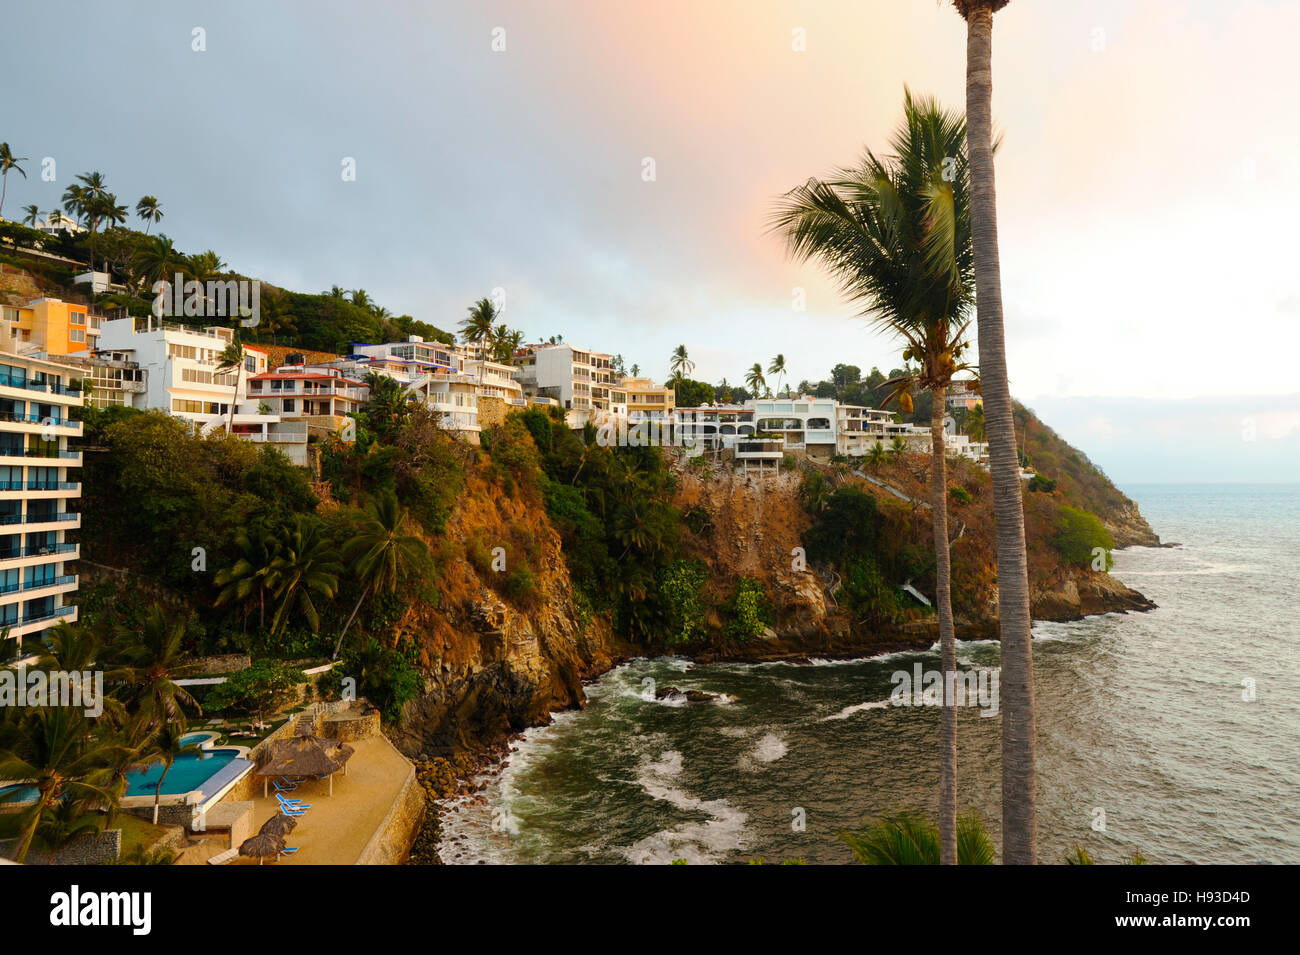 Coastal homes and apartments on cliffs above Pacific Ocean in Acapulco, Mexico. Property released. Stock Photo